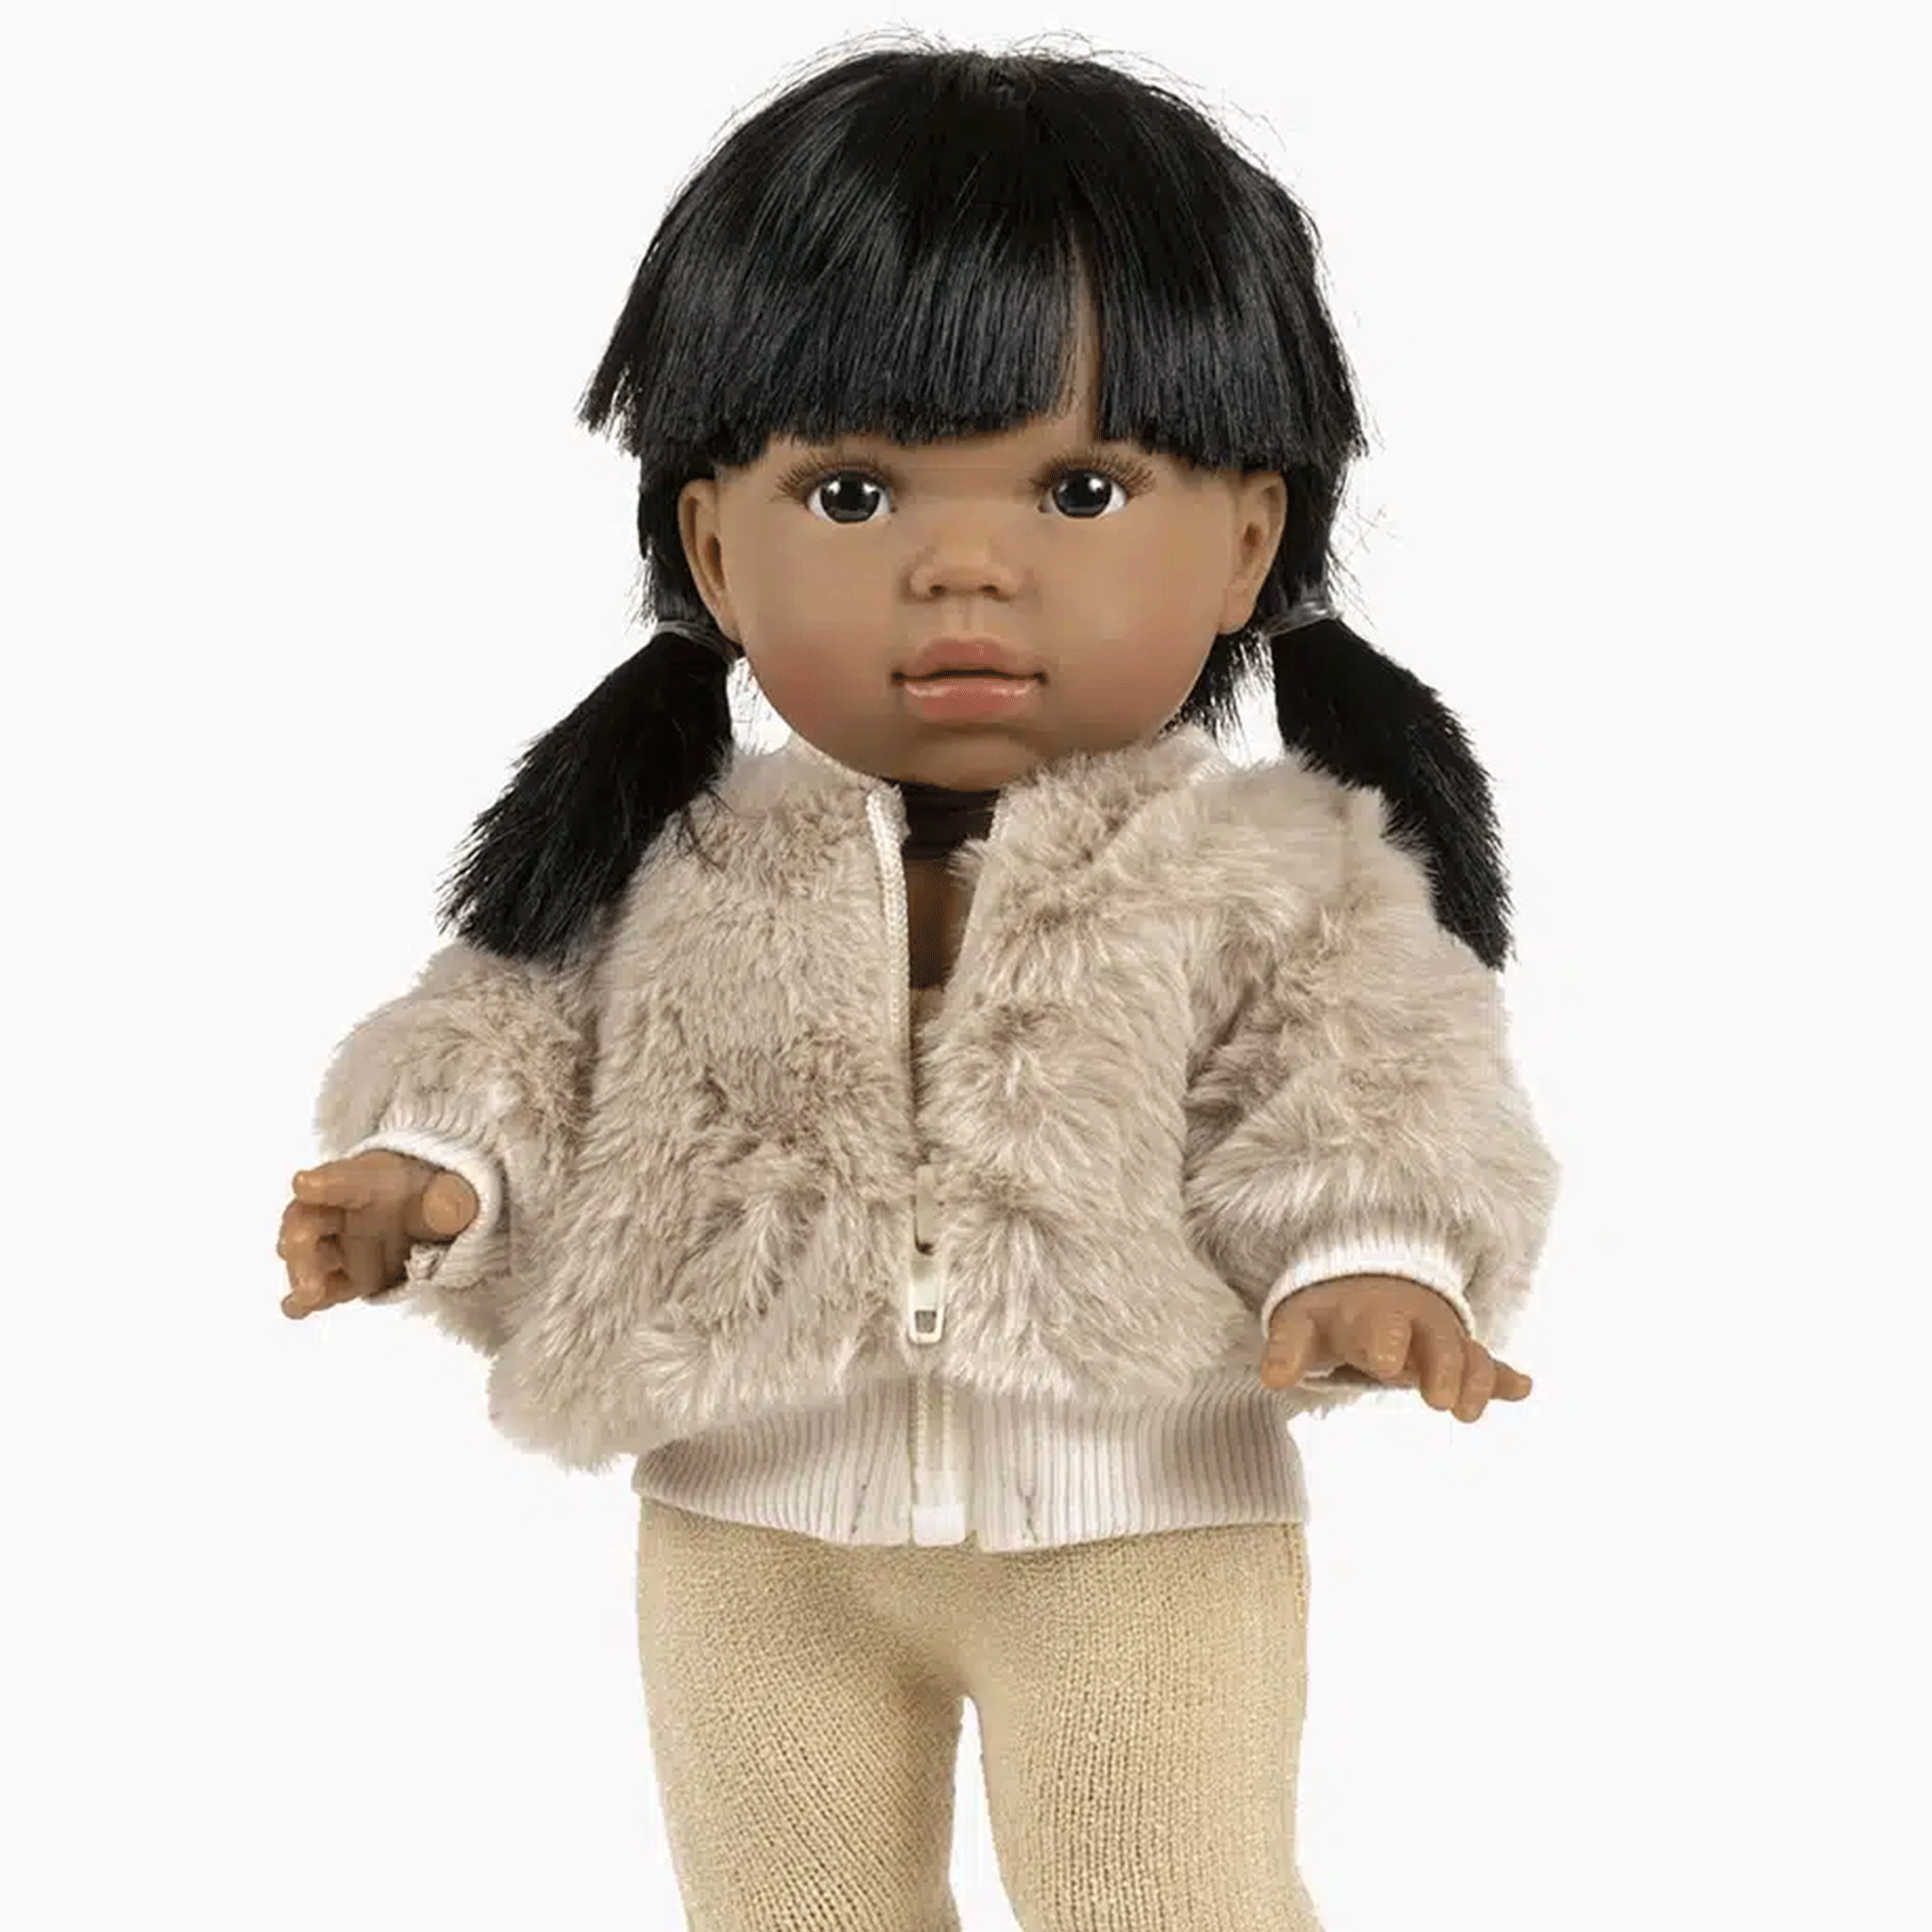 On a white background is a baby doll wearing a light brown faux fur jacket with a front zipper. 